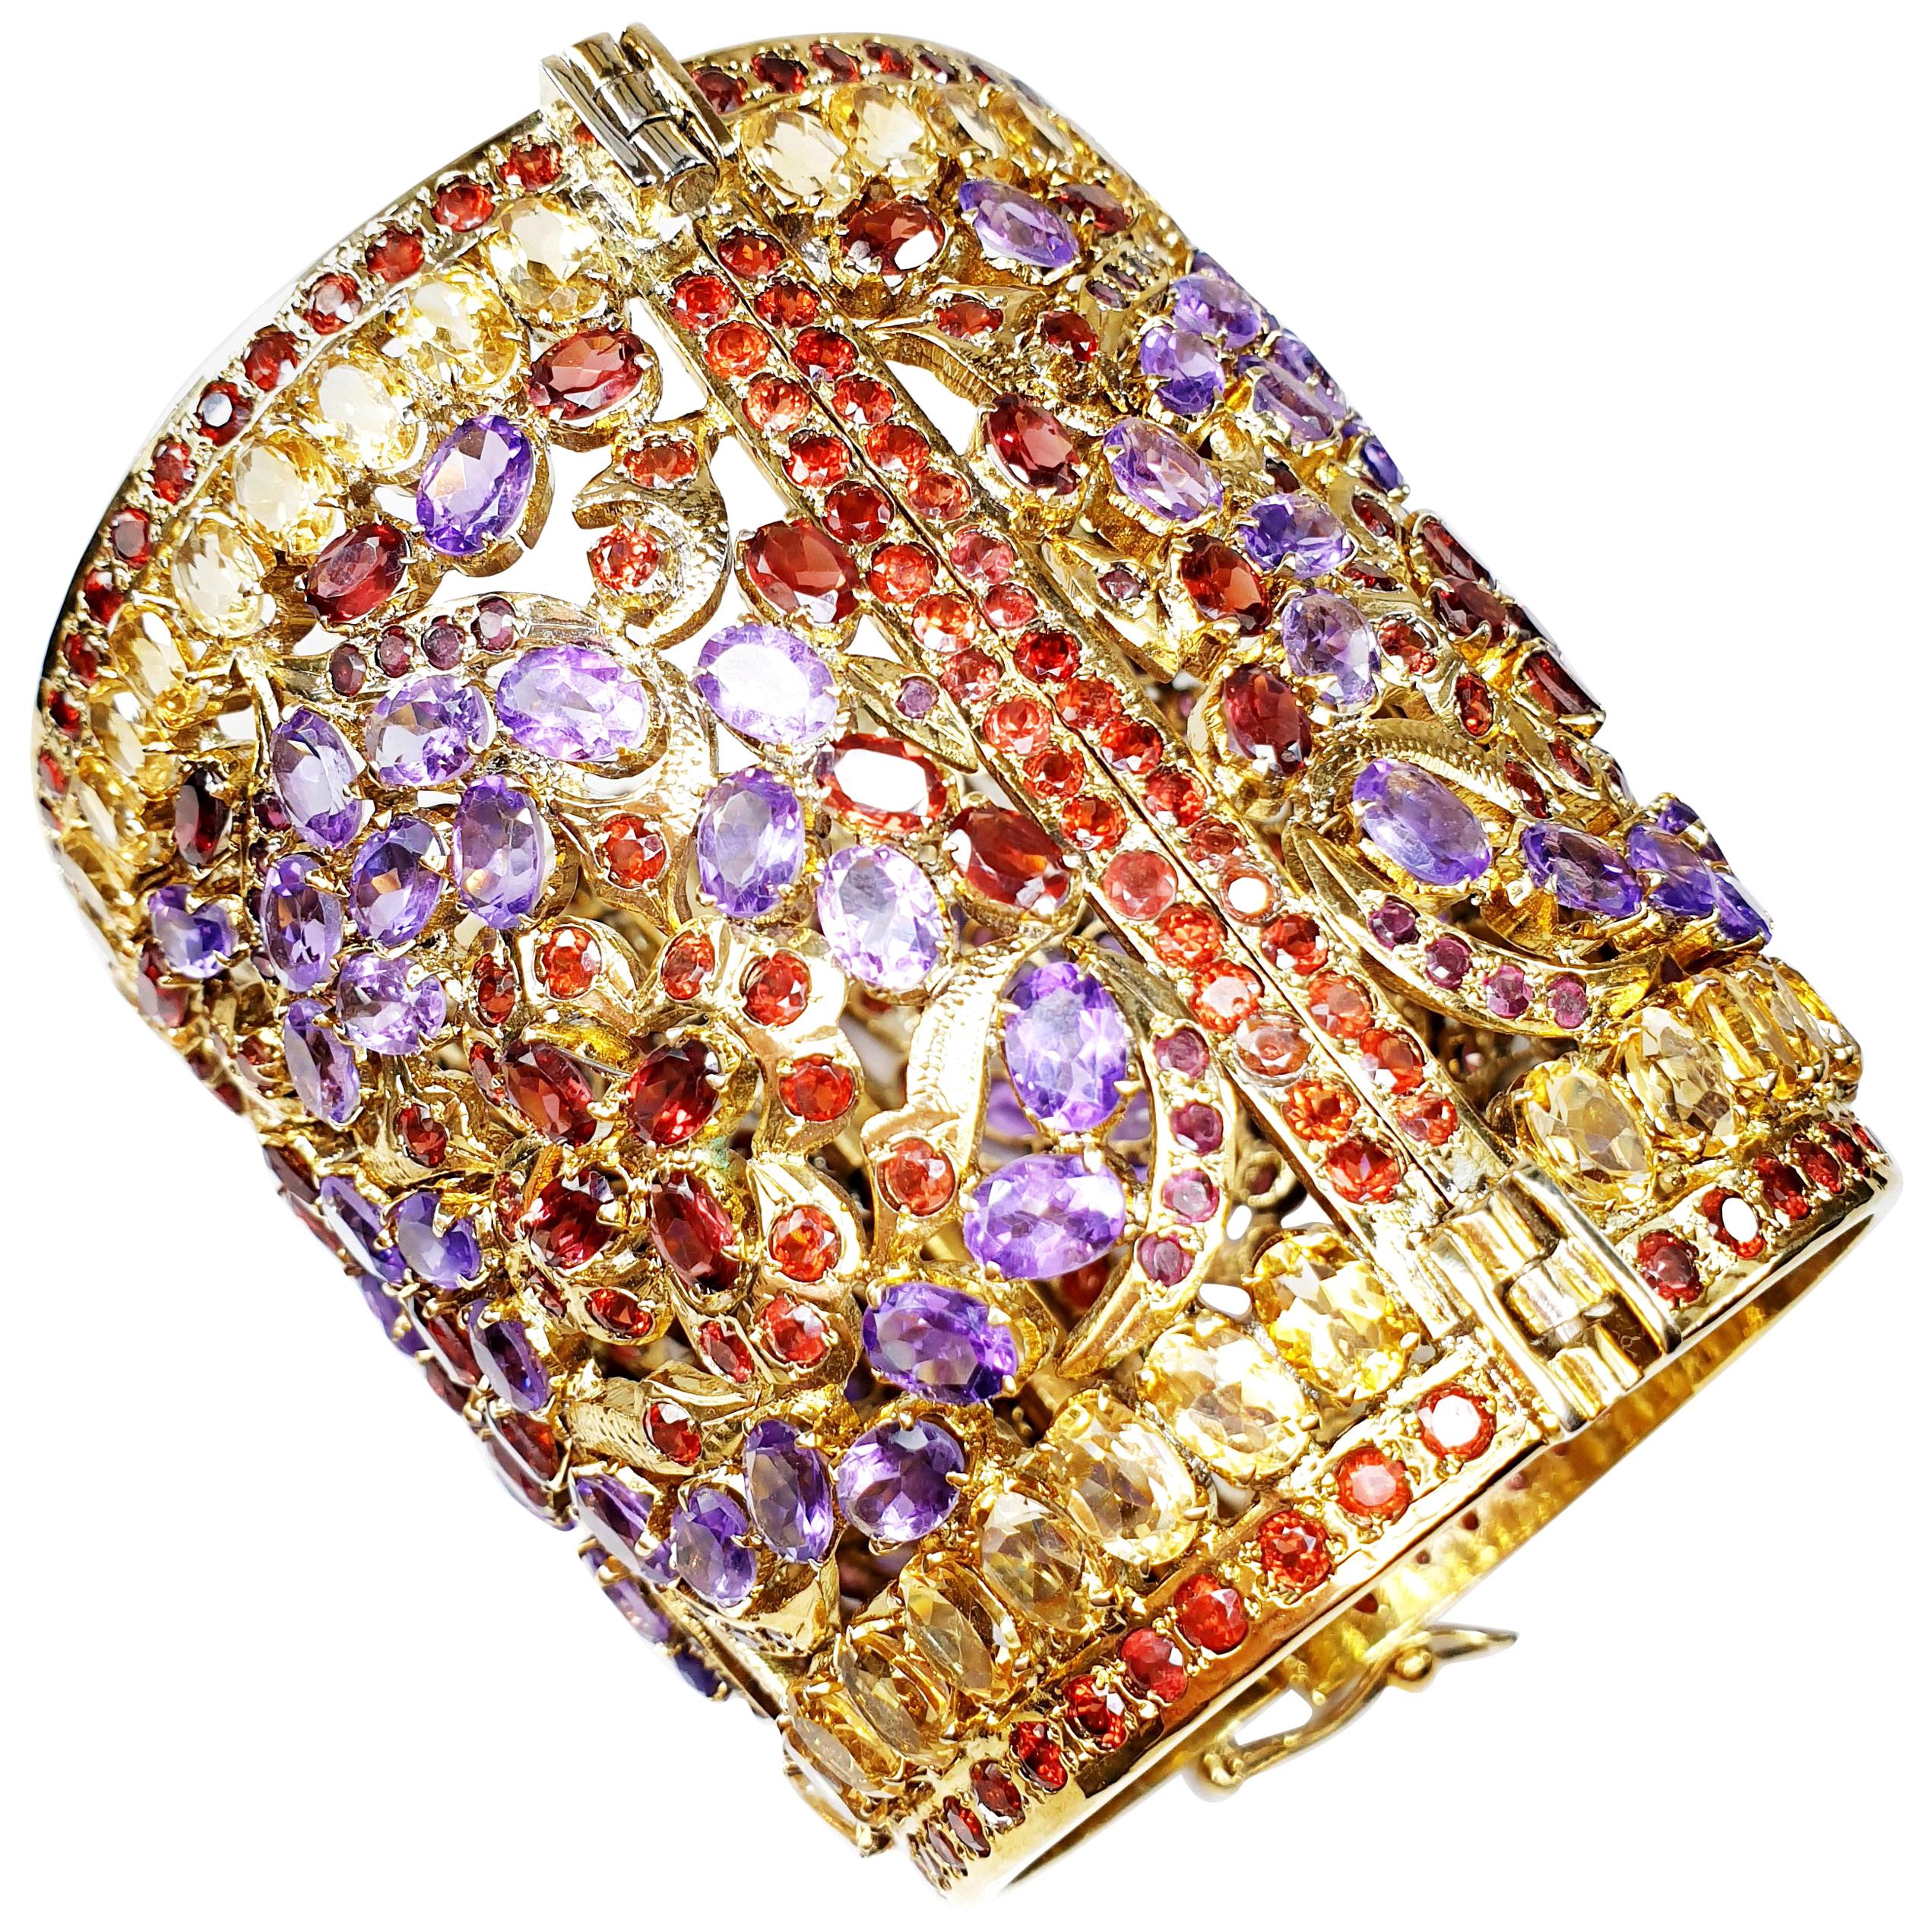 Gold-Plated Indian Cuff Bracelet with Amethysts, Citrines and Granates